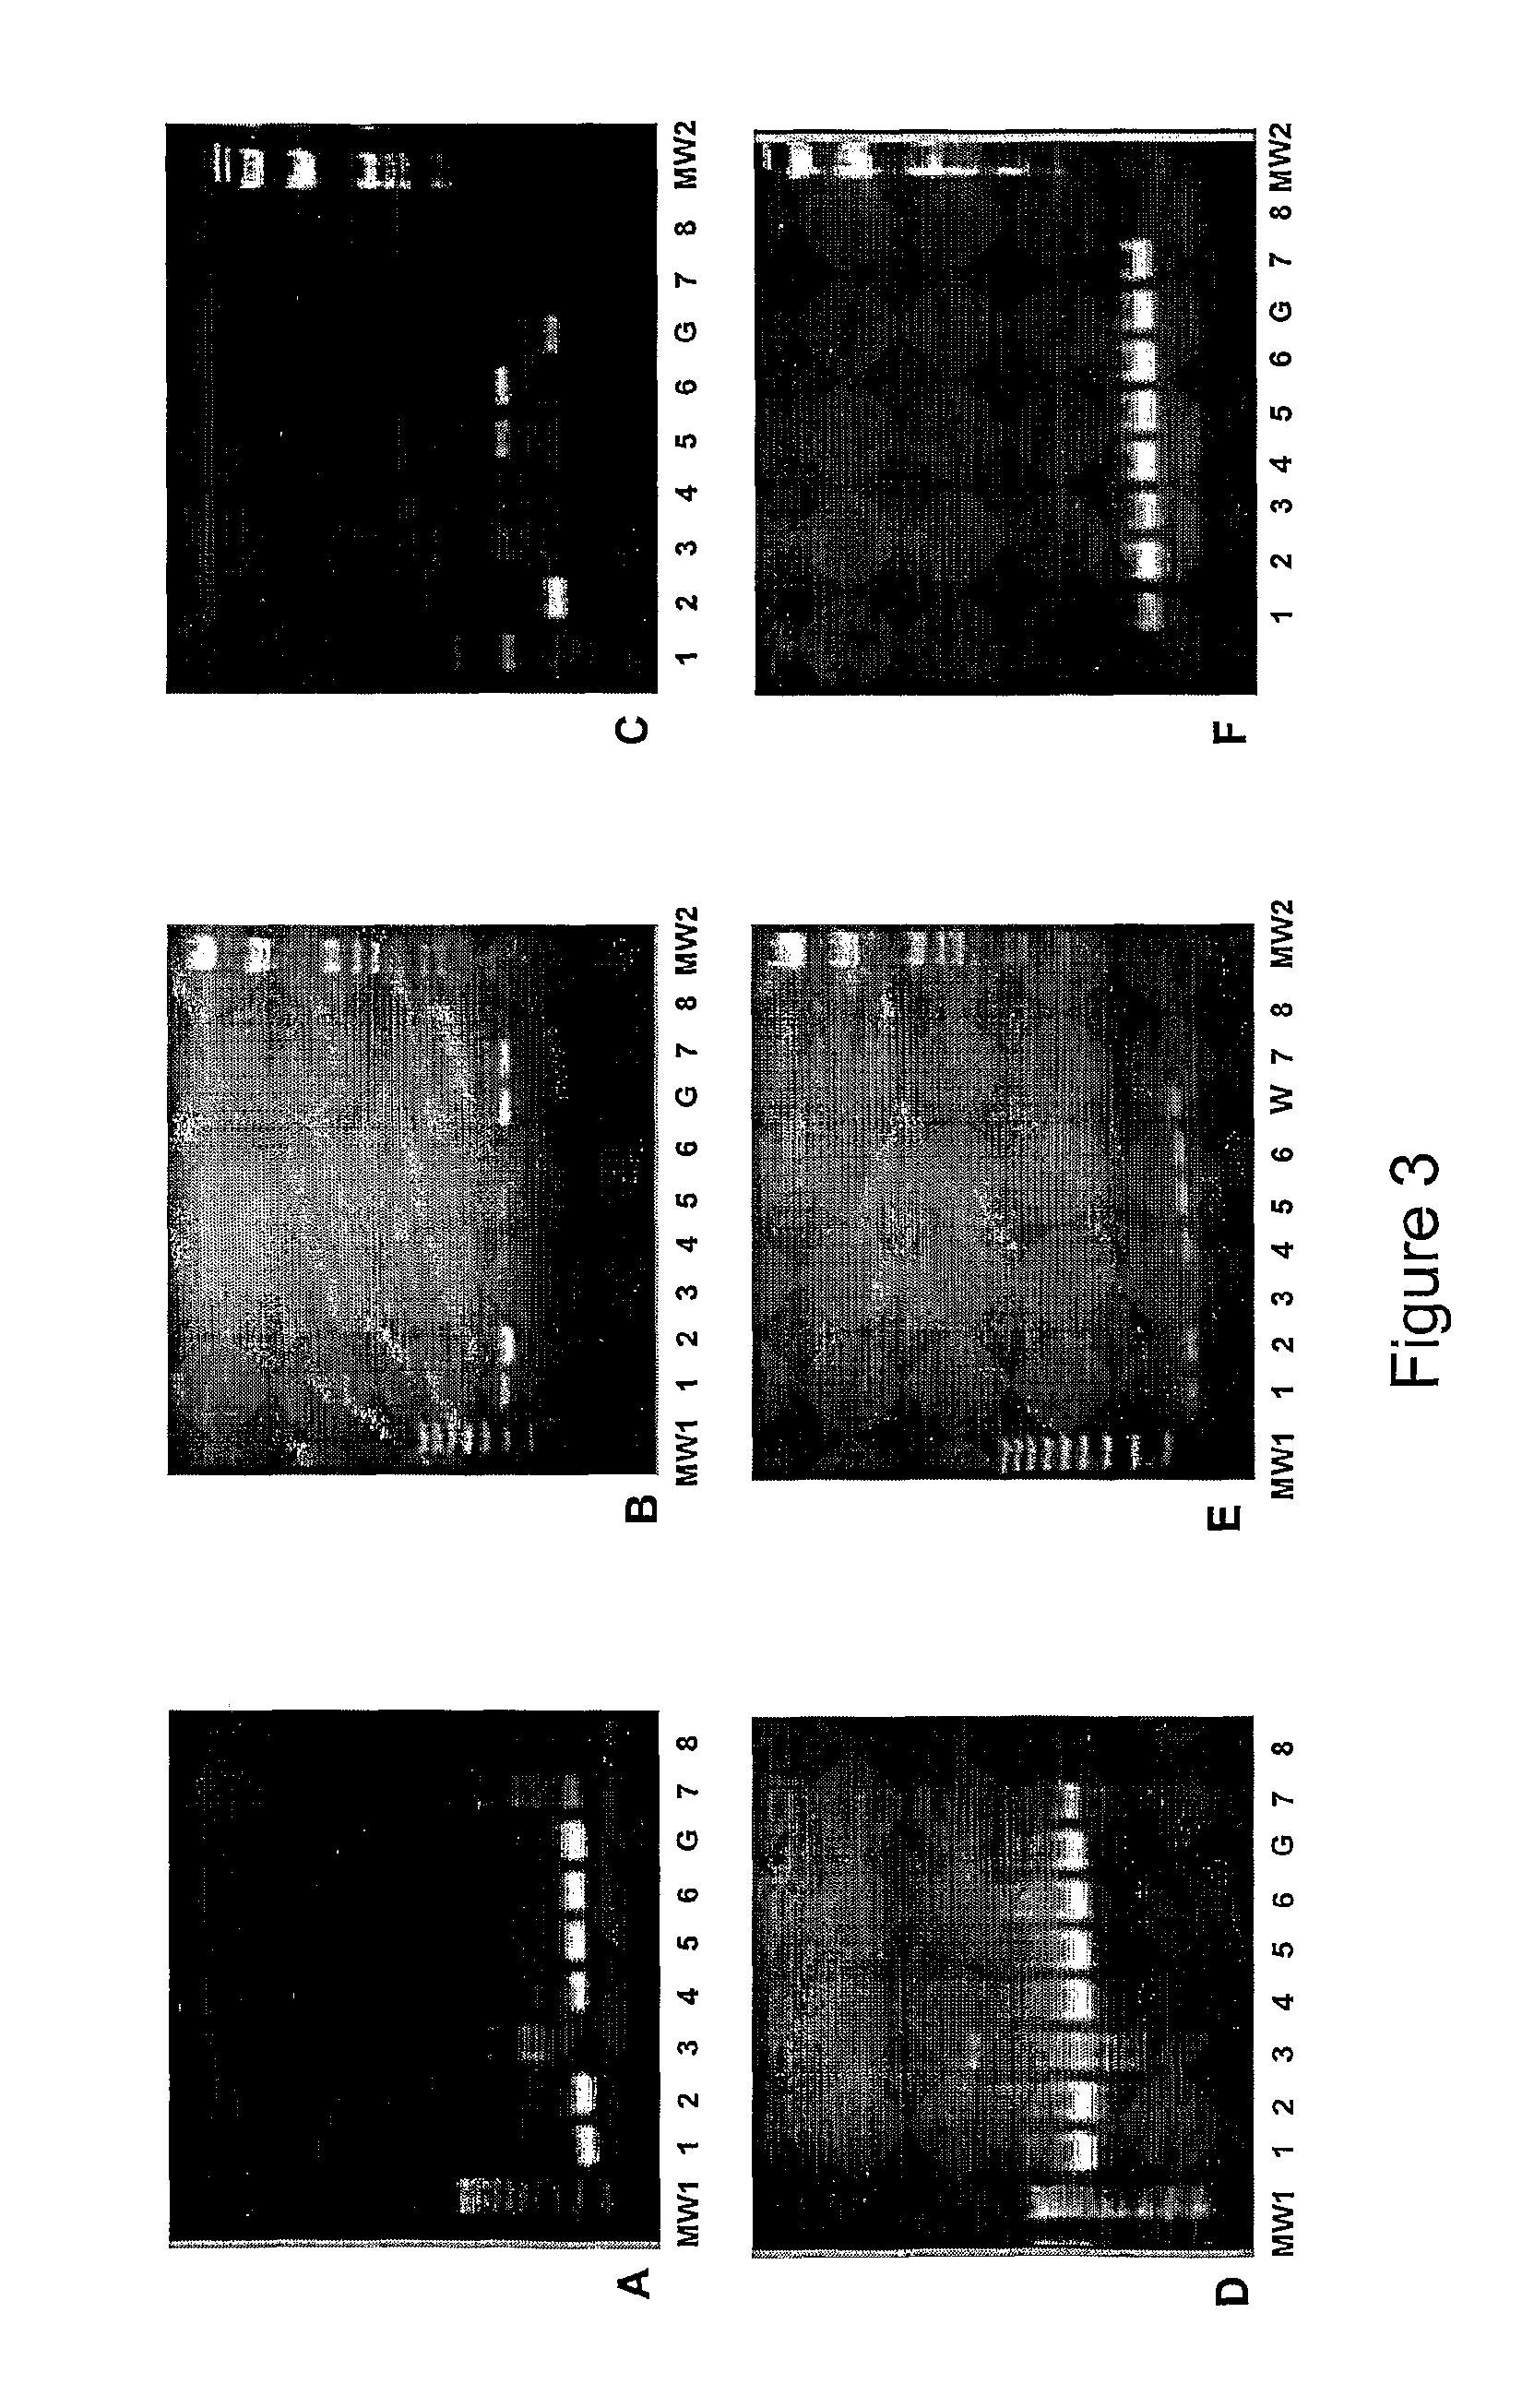 Target genes for strain-specific diagnostic of Ehrlichia ruminantium and use thereof